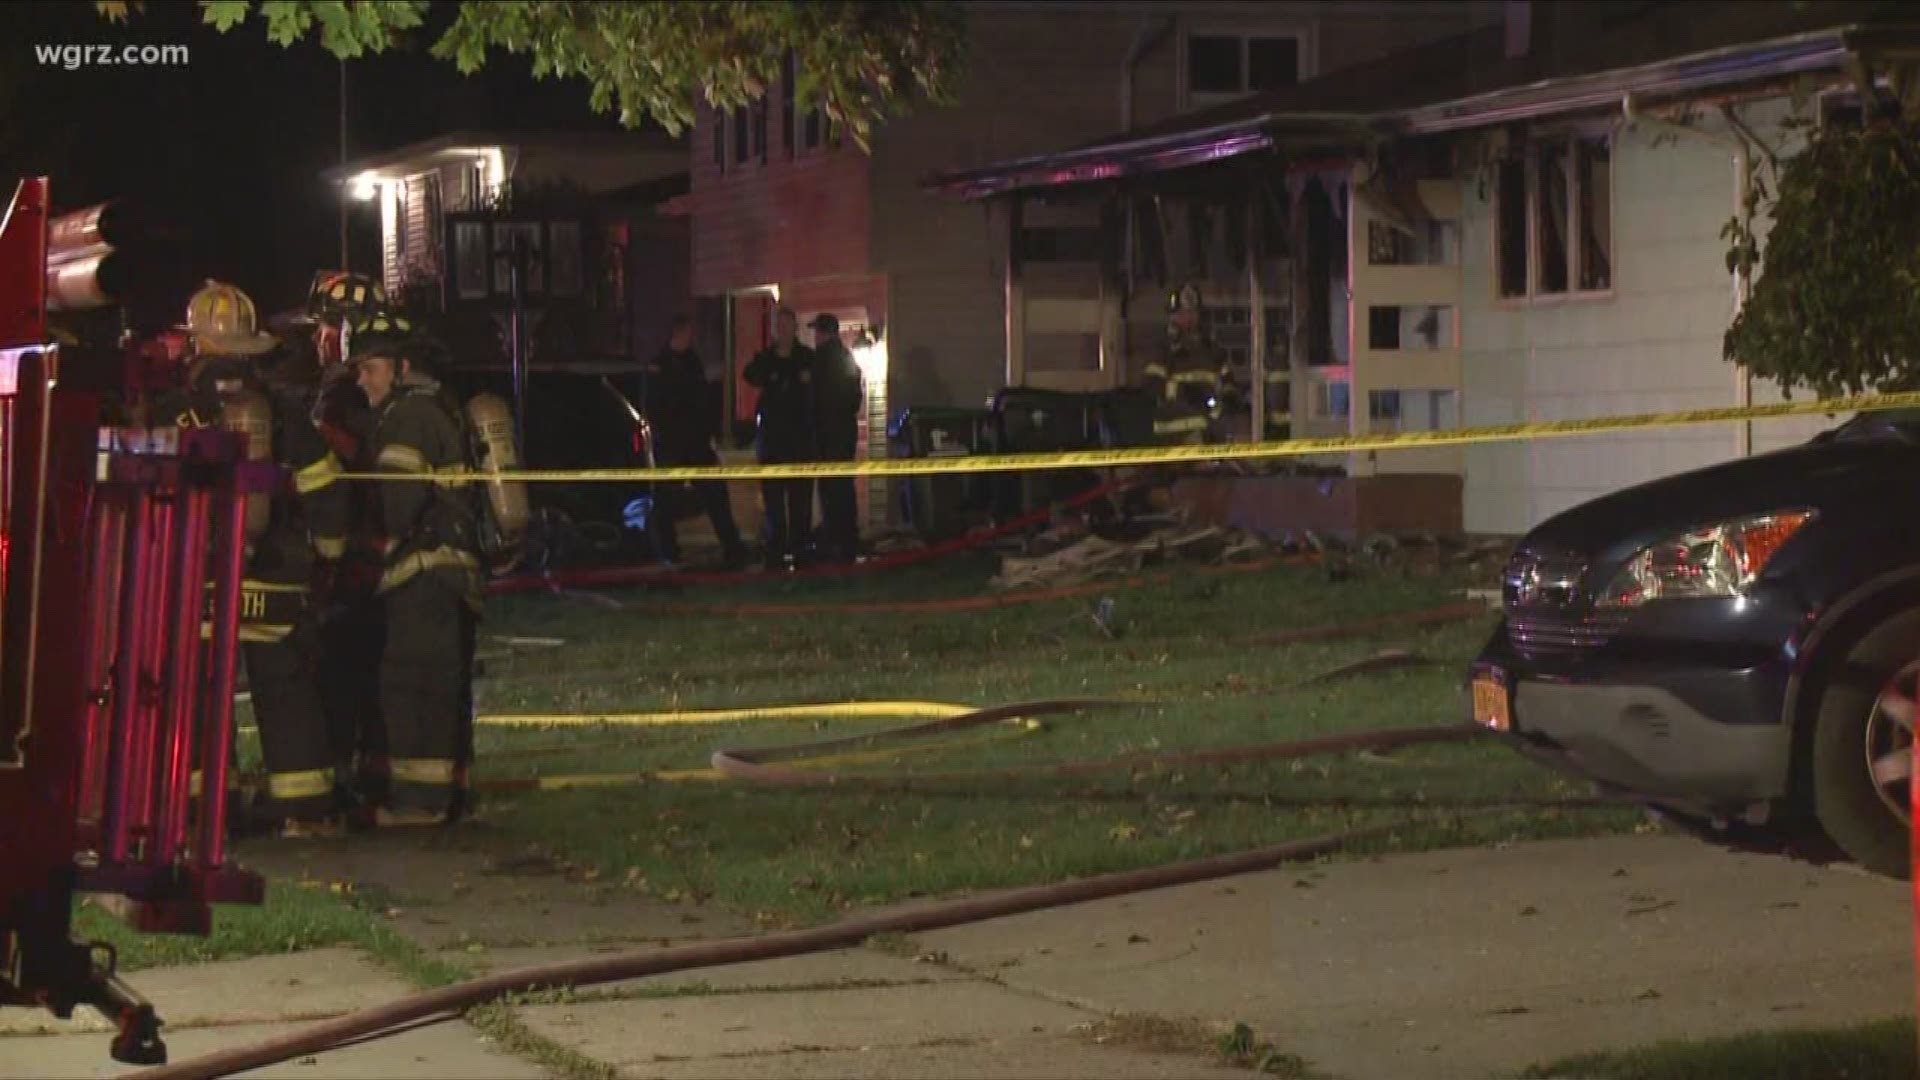 Child killed at overnight fire